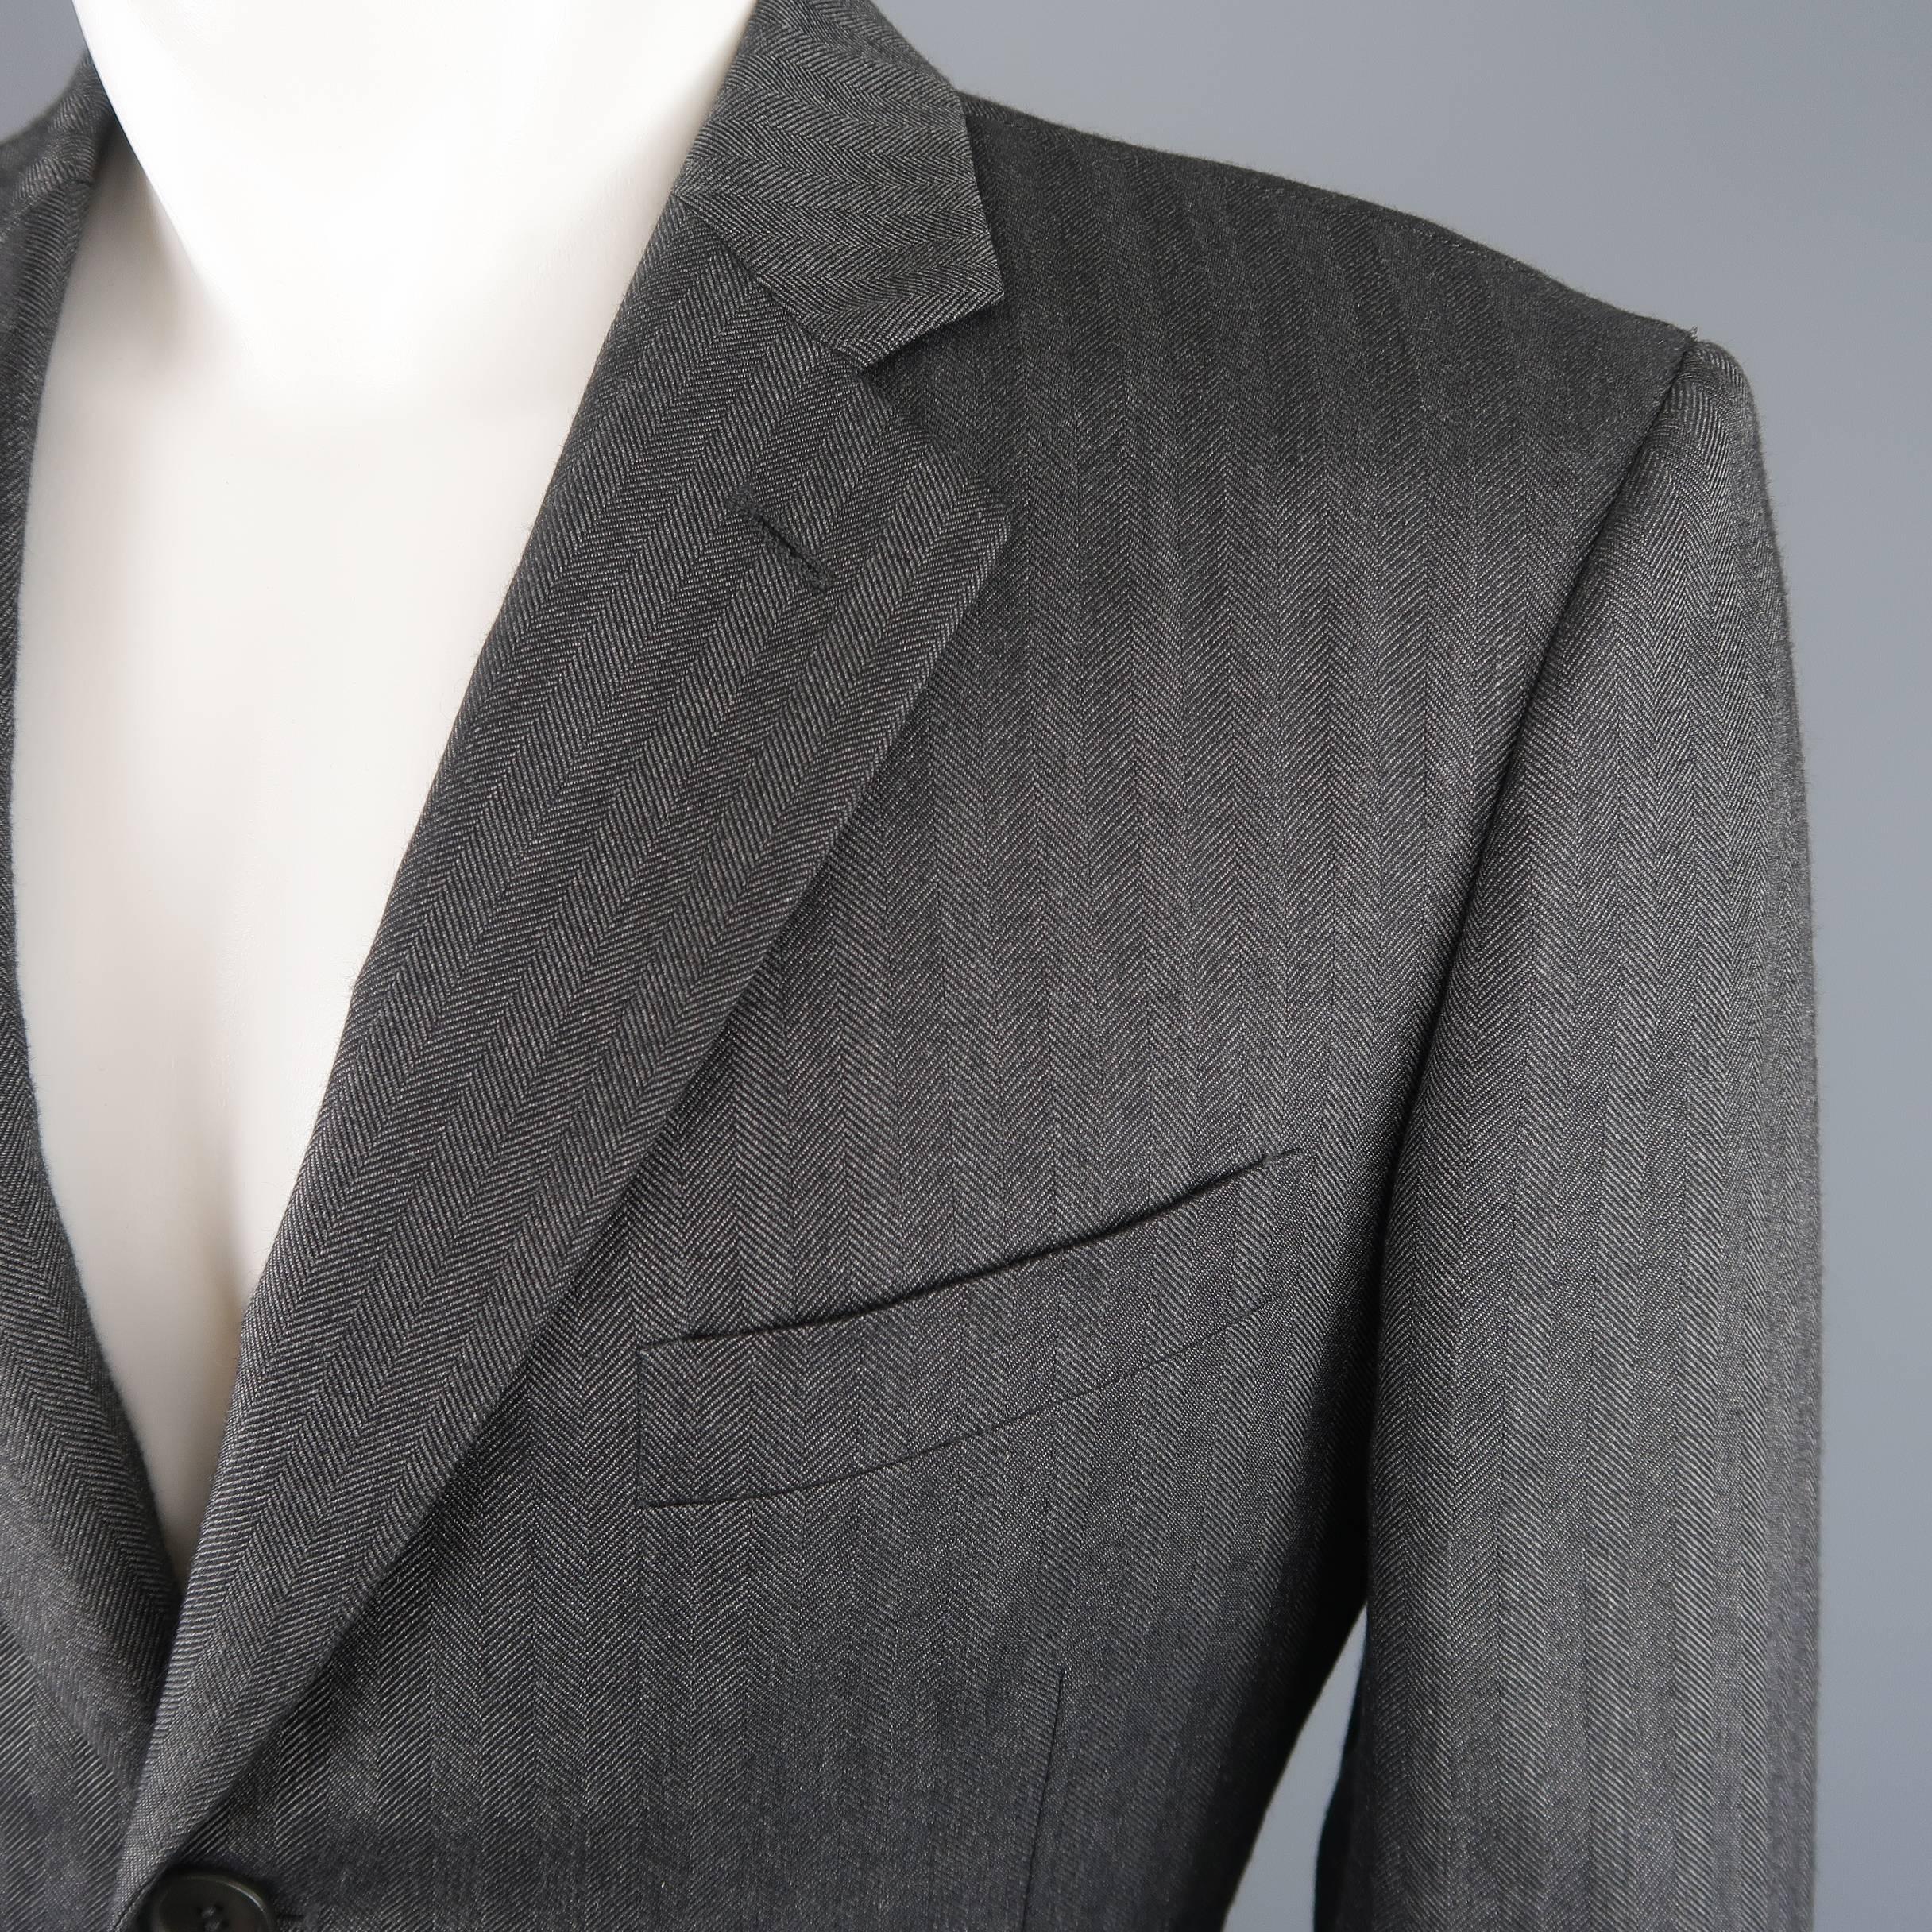 
Single breasted GIORGIO ARMANI sport coat comes in gray herringbone cashmere silk blend fabric with a notch lapel, three button front, and slit pockets. Made in Italy.
 
Excellent Pre-Owned Condition.
Marked: IT 50
 
Measurements:
 

    Shoulder: